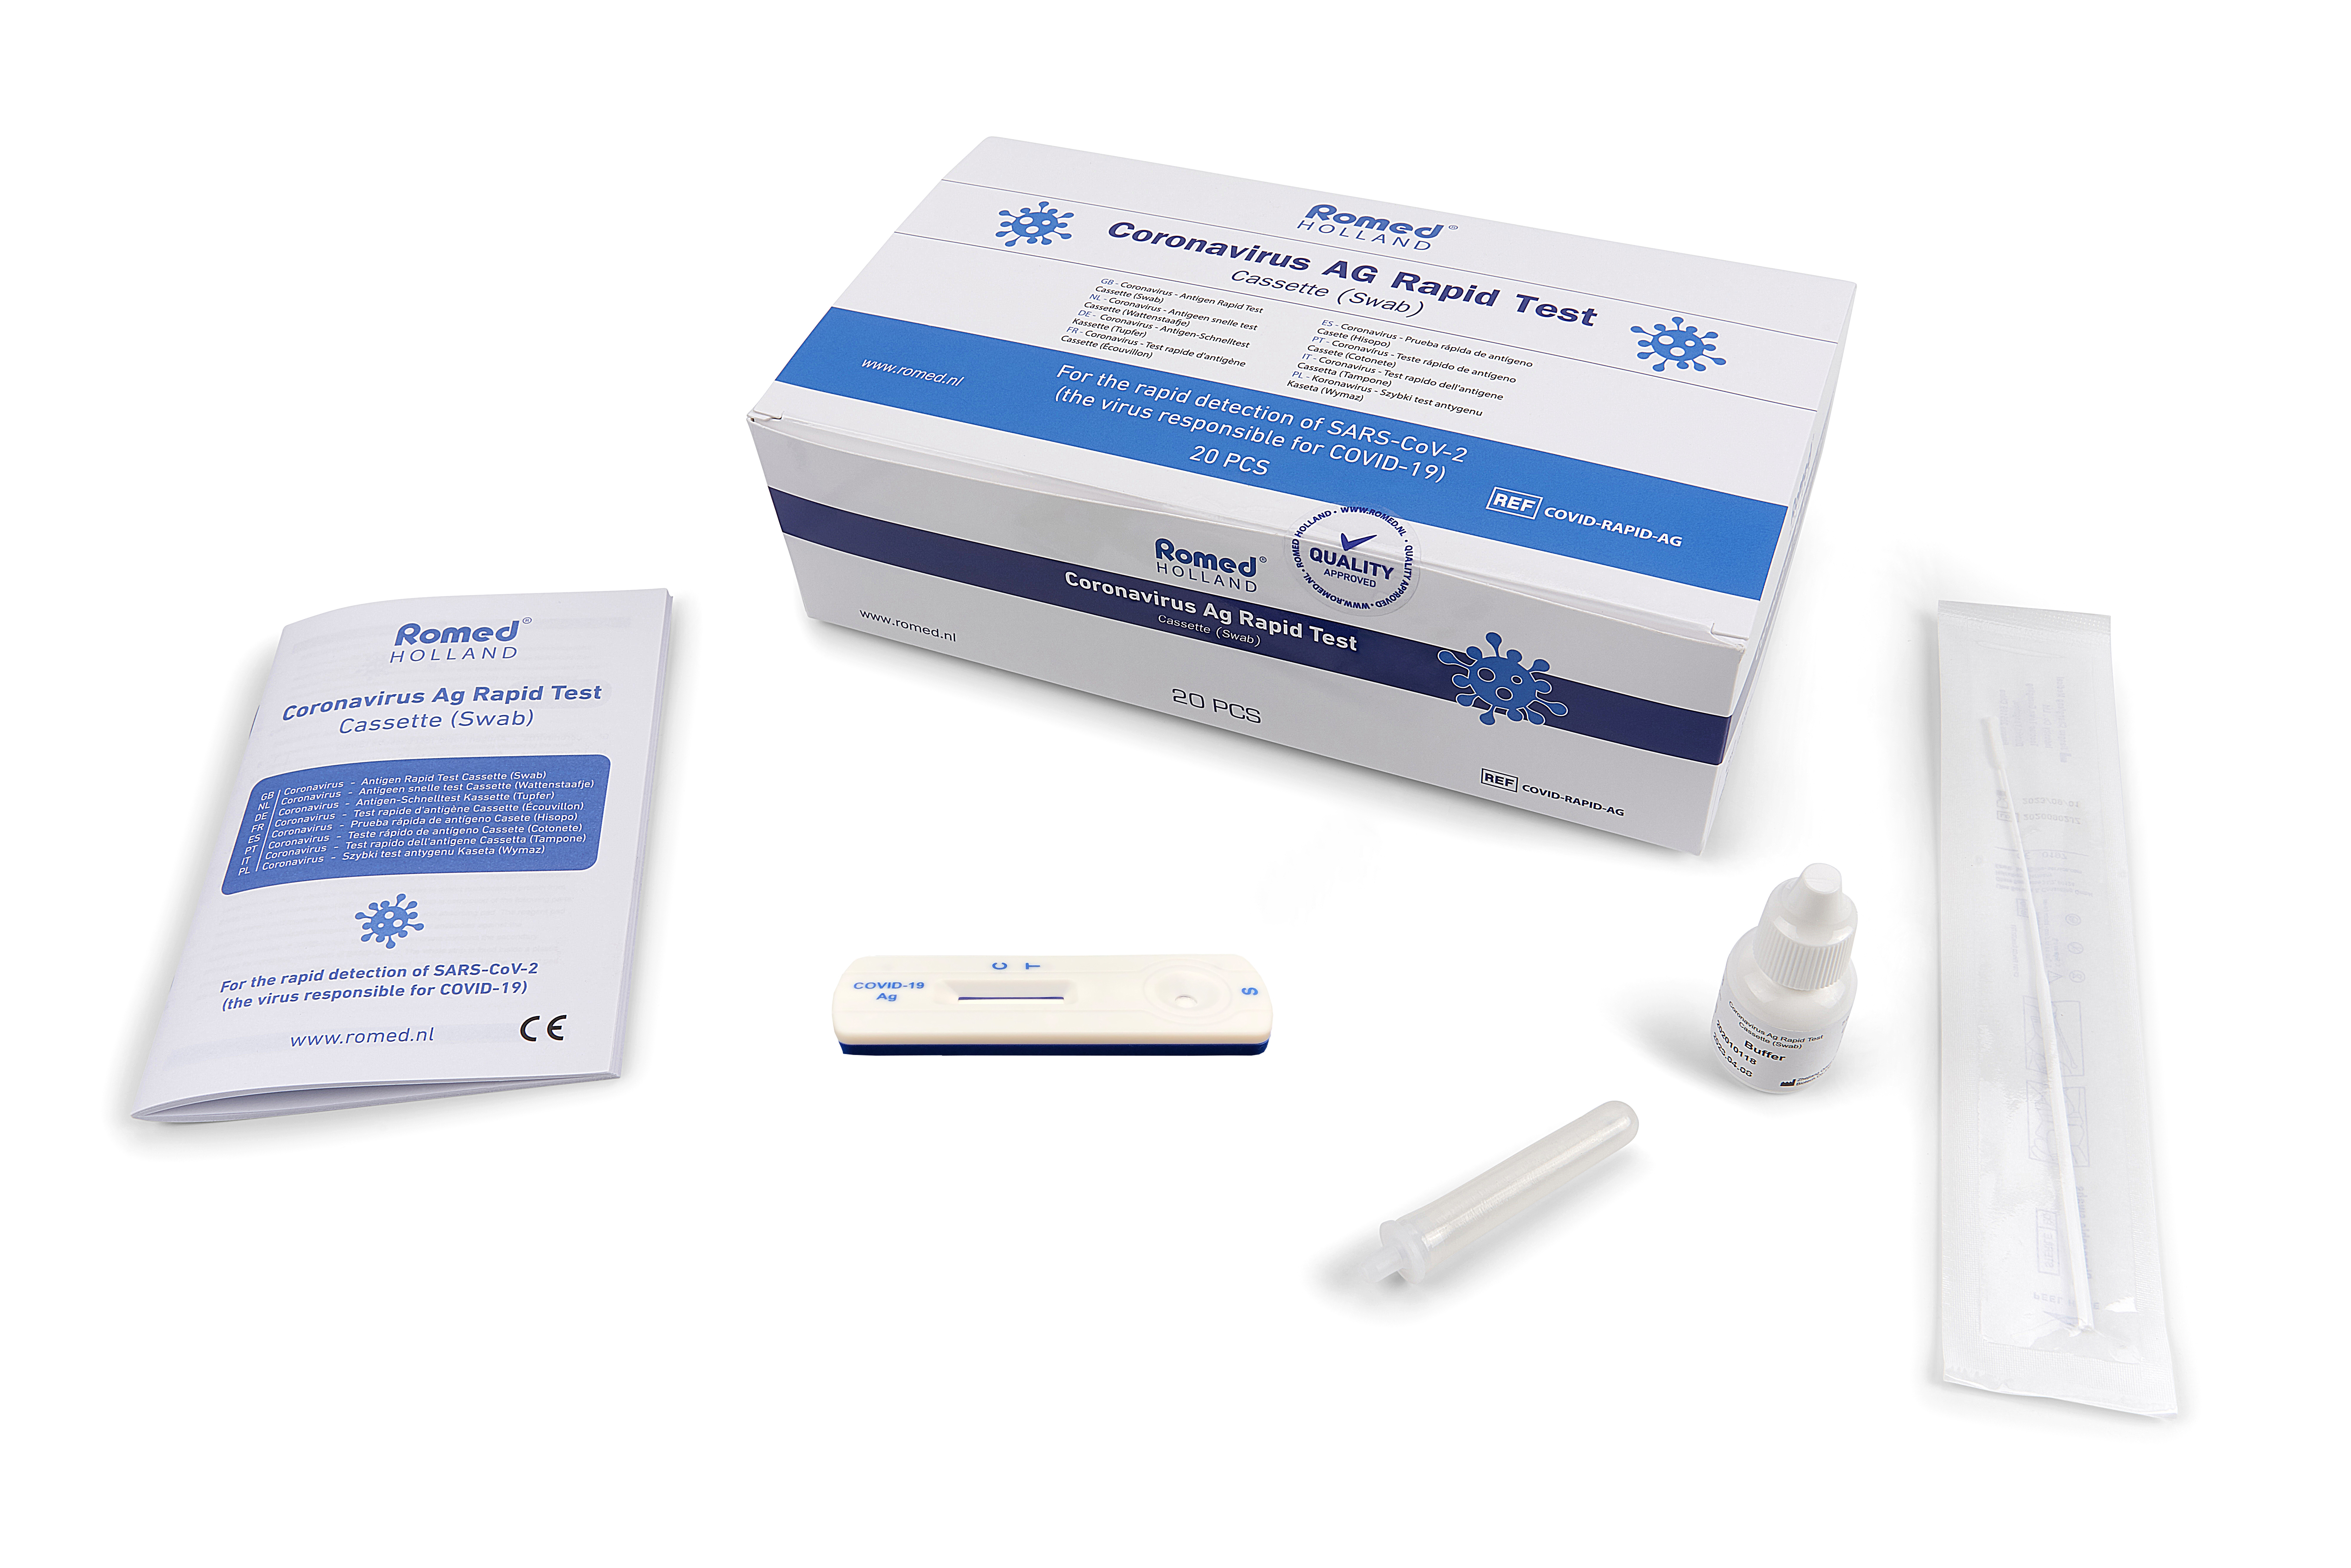 COVID-R20-AG600 Romed COVID-19 antigen rapid test cassette for the detection of an acute SARS-CoV-2   infection. This test shows whether SARS-COV-2 antigens are present in the nasal mucus.

Materials provided:
20 Test Cassettes
2 Extraction Buffer Vials
20 Sterile Swabs
20 Extraction Tubes and Tips
1 Workstation
1 Package Insert

Packed per 20 pcs in an innerbox, 600 pcs per carton.